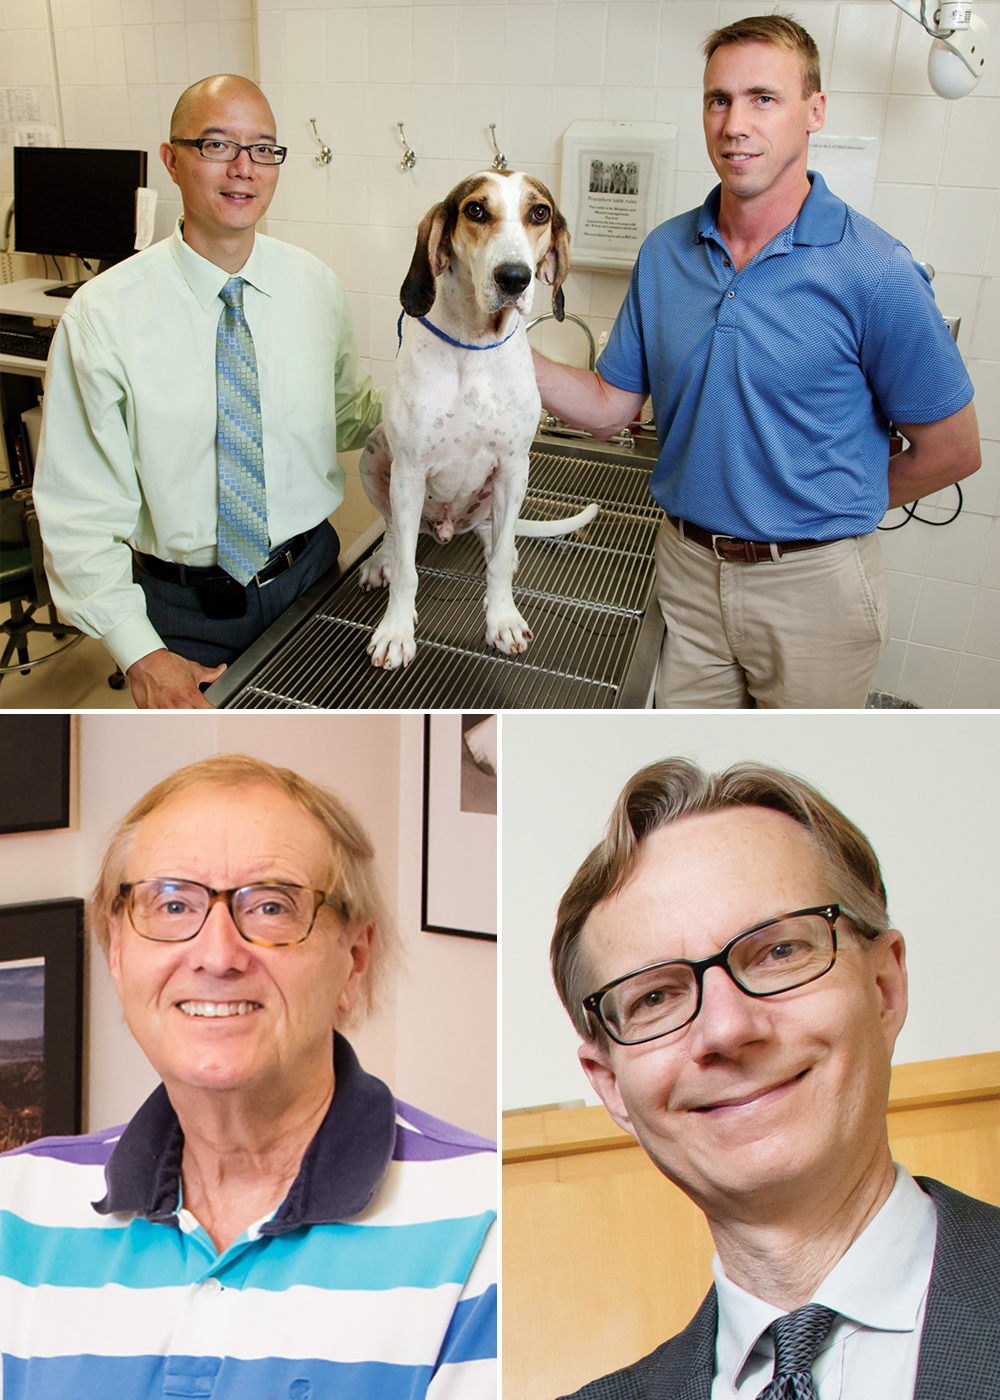 (from top left, clockwise) Timothy Fan, Hoover the research dog, Paul Hergenrother, Steven Zimmerman, and Eric Oldfield. 